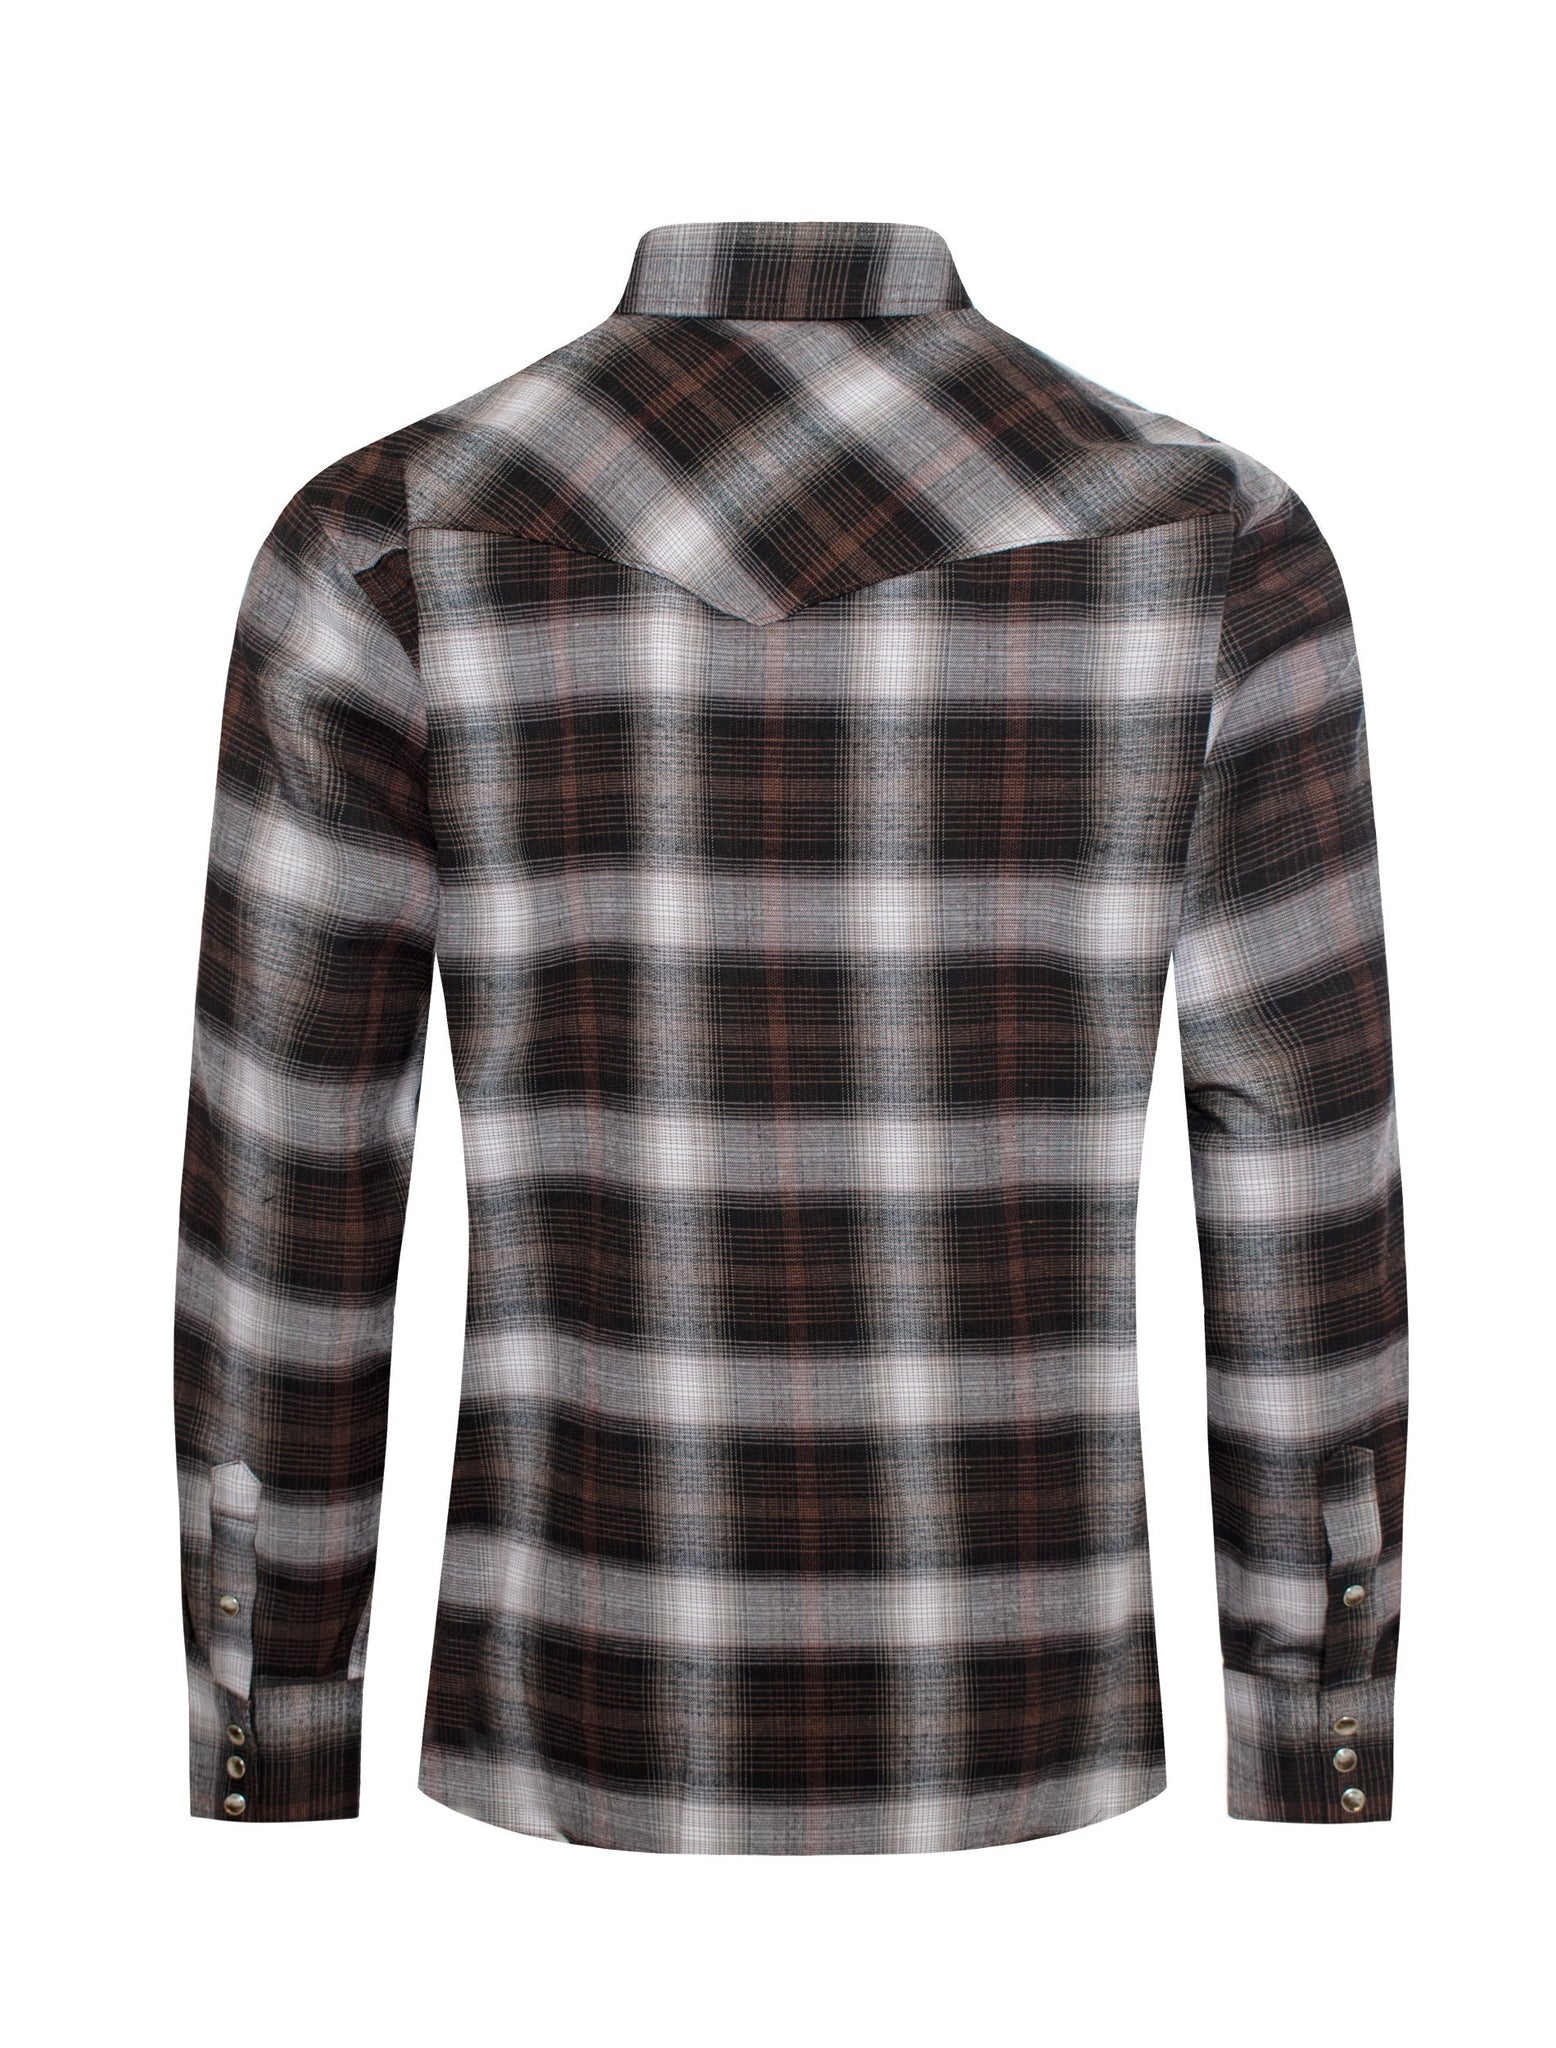 Men's Western Flannel Shirts With Snap Buttons -FLS300-305